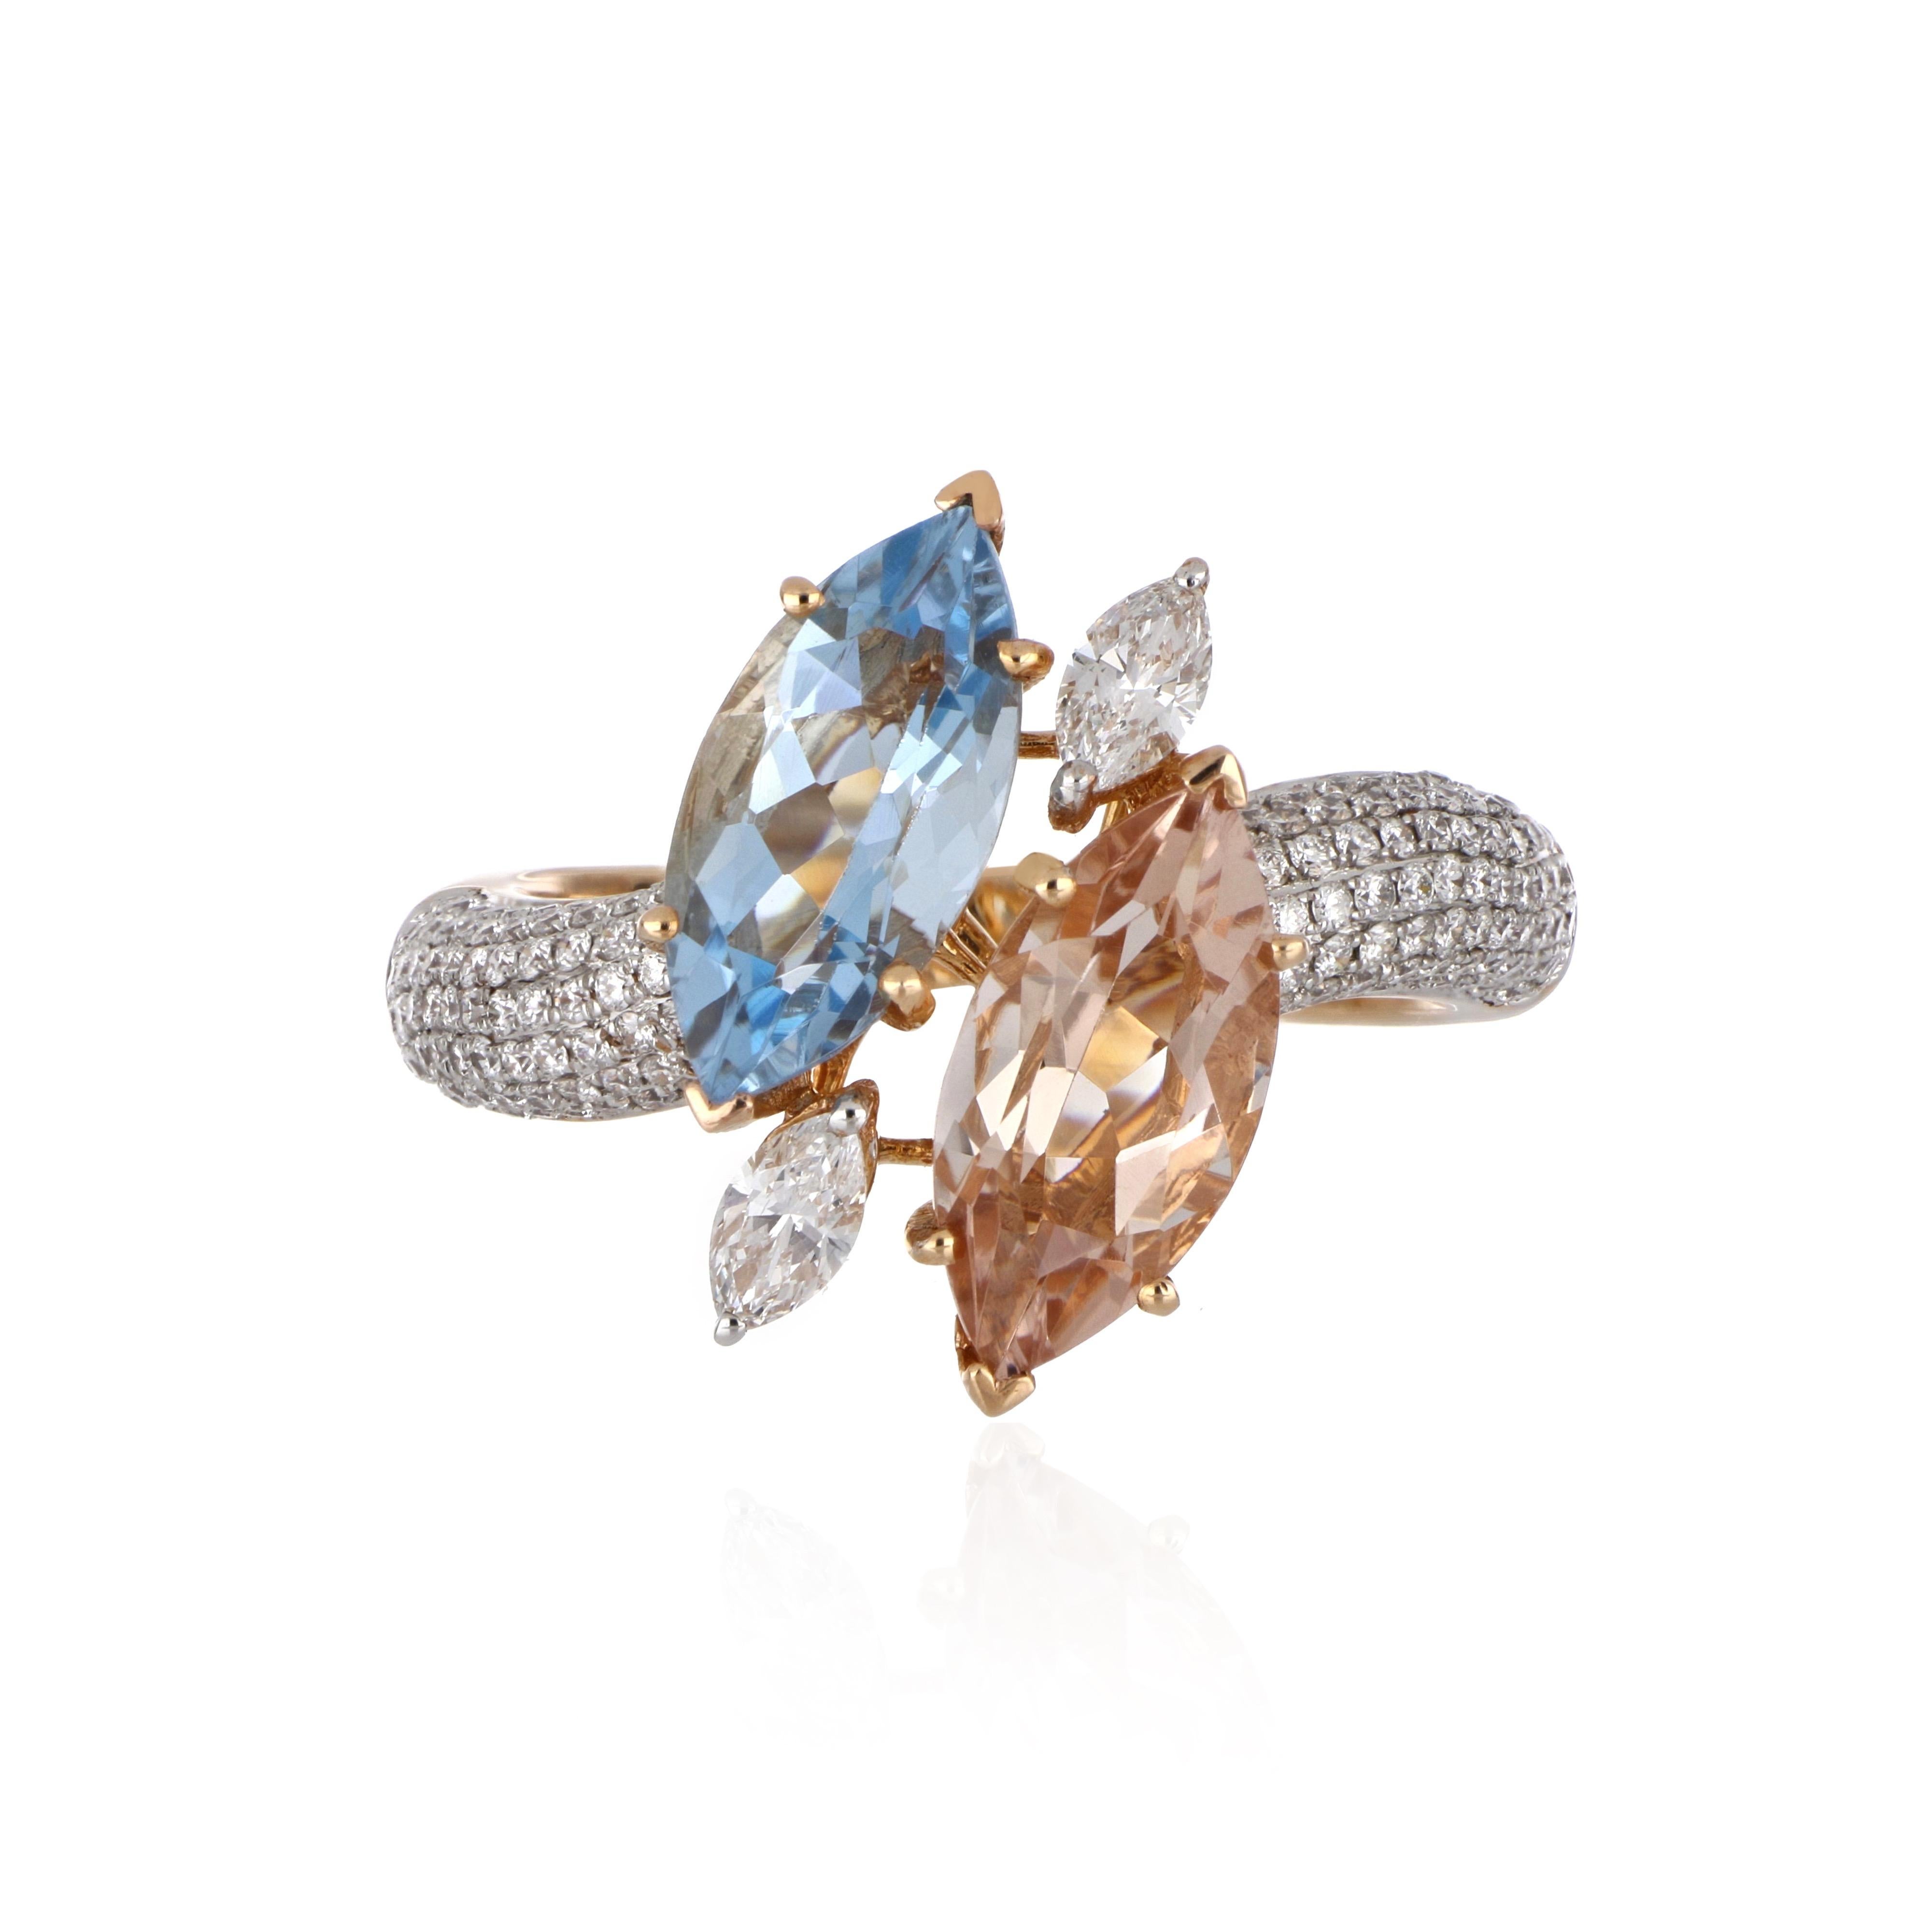 Elegant and exquisitely detailed Cocktail 18K Ring, centre set with 1.64 Ct Marquise Morganite and 1.62 Ct Marquise Aquamarine, surrounded by and enhanced on shank with micro pave Diamonds, weighing approx. 0.69 total carat weight. Beautifully Hand